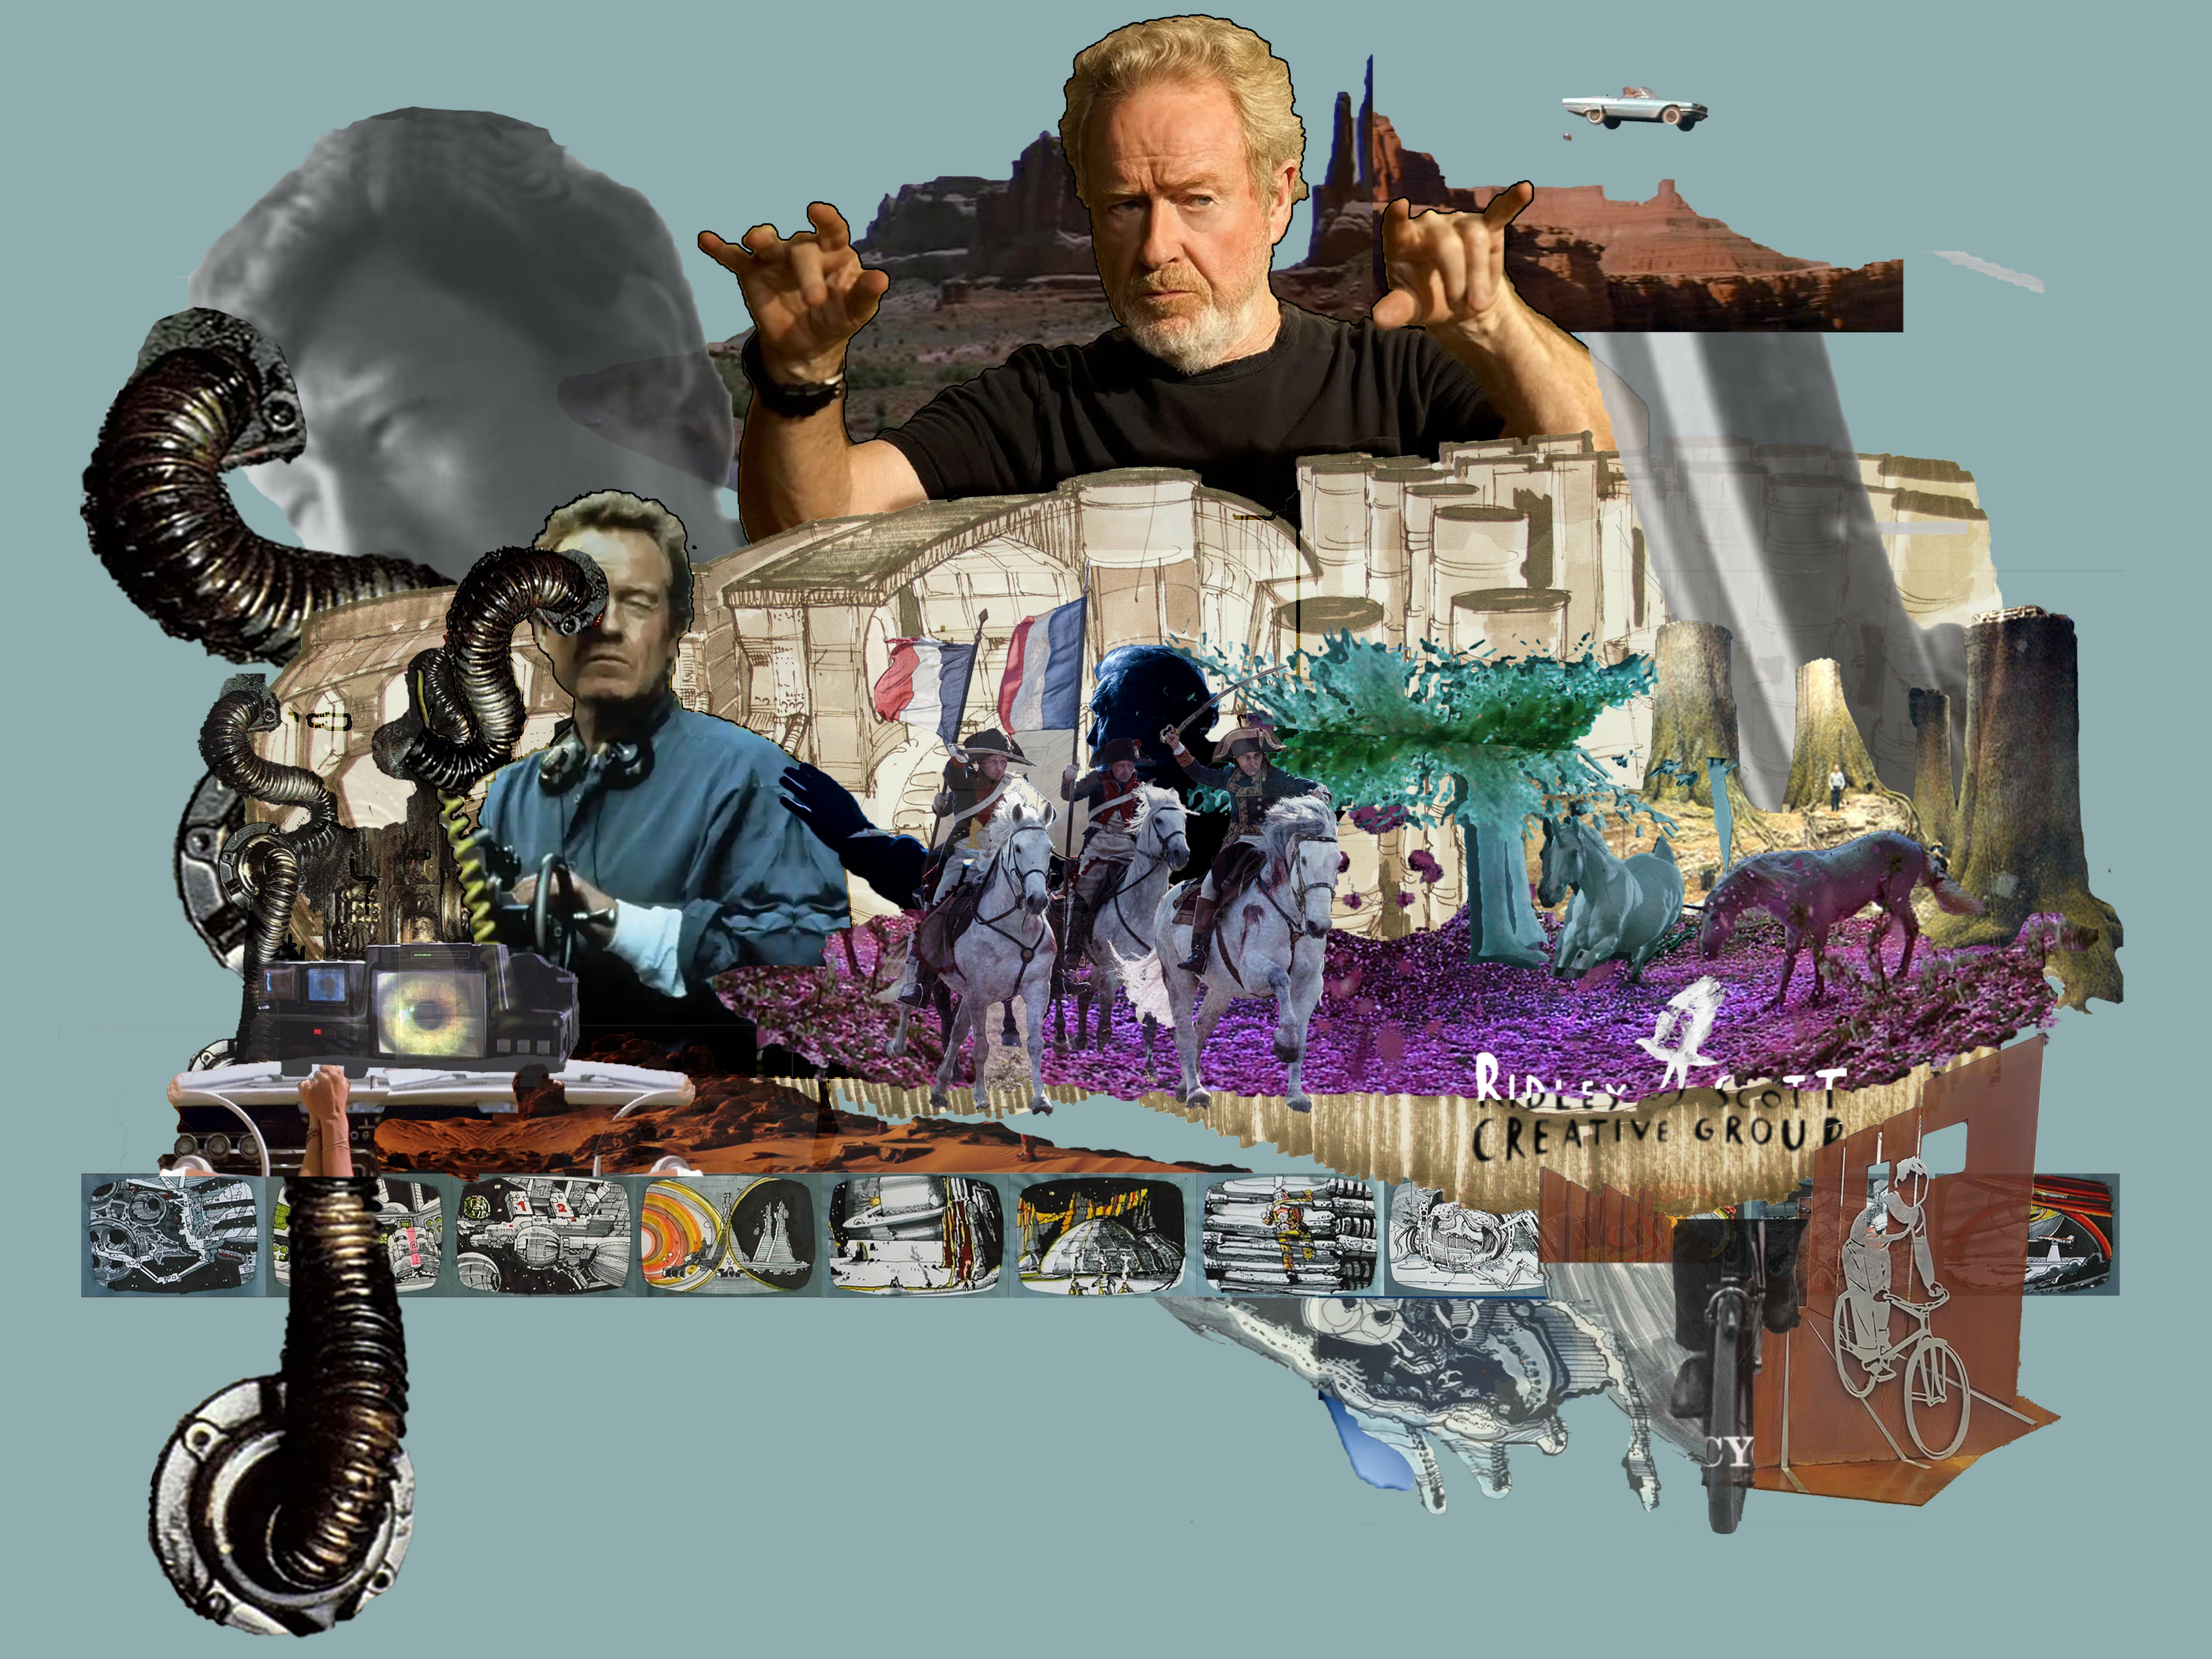 artistic photomontage of images of director Ridley Scott with film stills and Ridleygrams from his directorial career